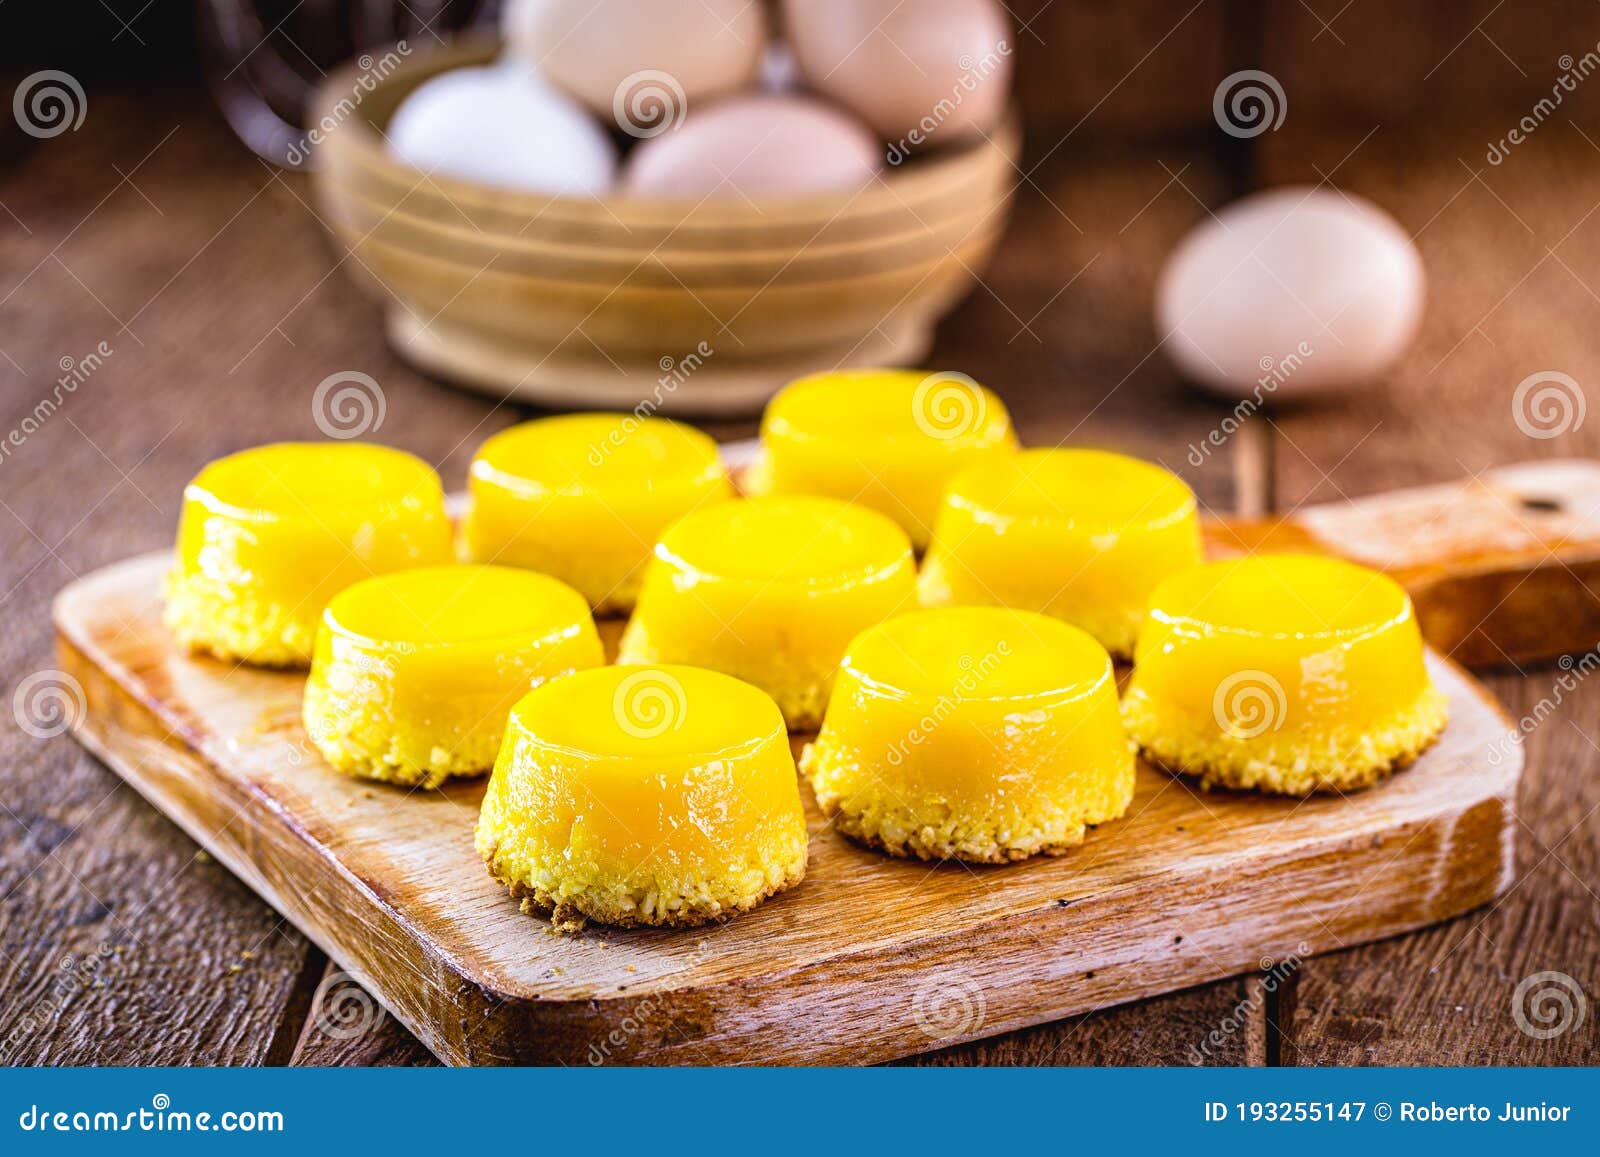 egg yolk candy, called quindim in brazil, and portugal in brisa-do-lis. sweet dessert on rustic wooden background